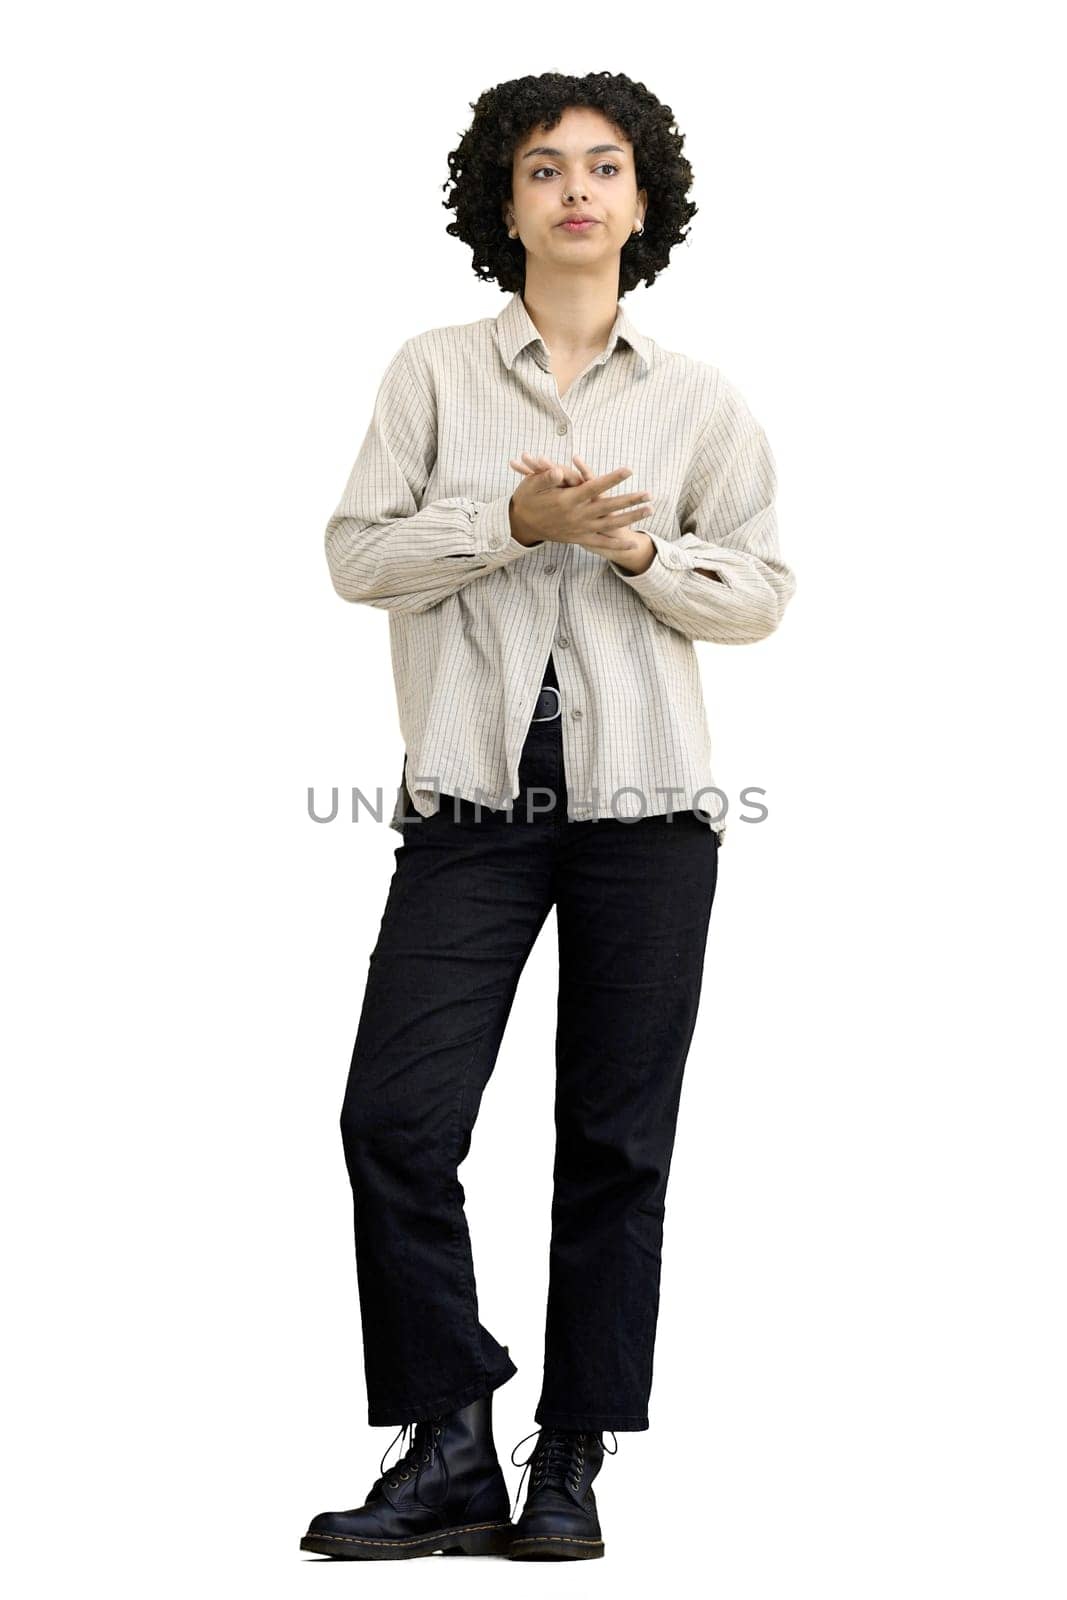 A woman, full-length, on a white background, looks at her watch by Prosto